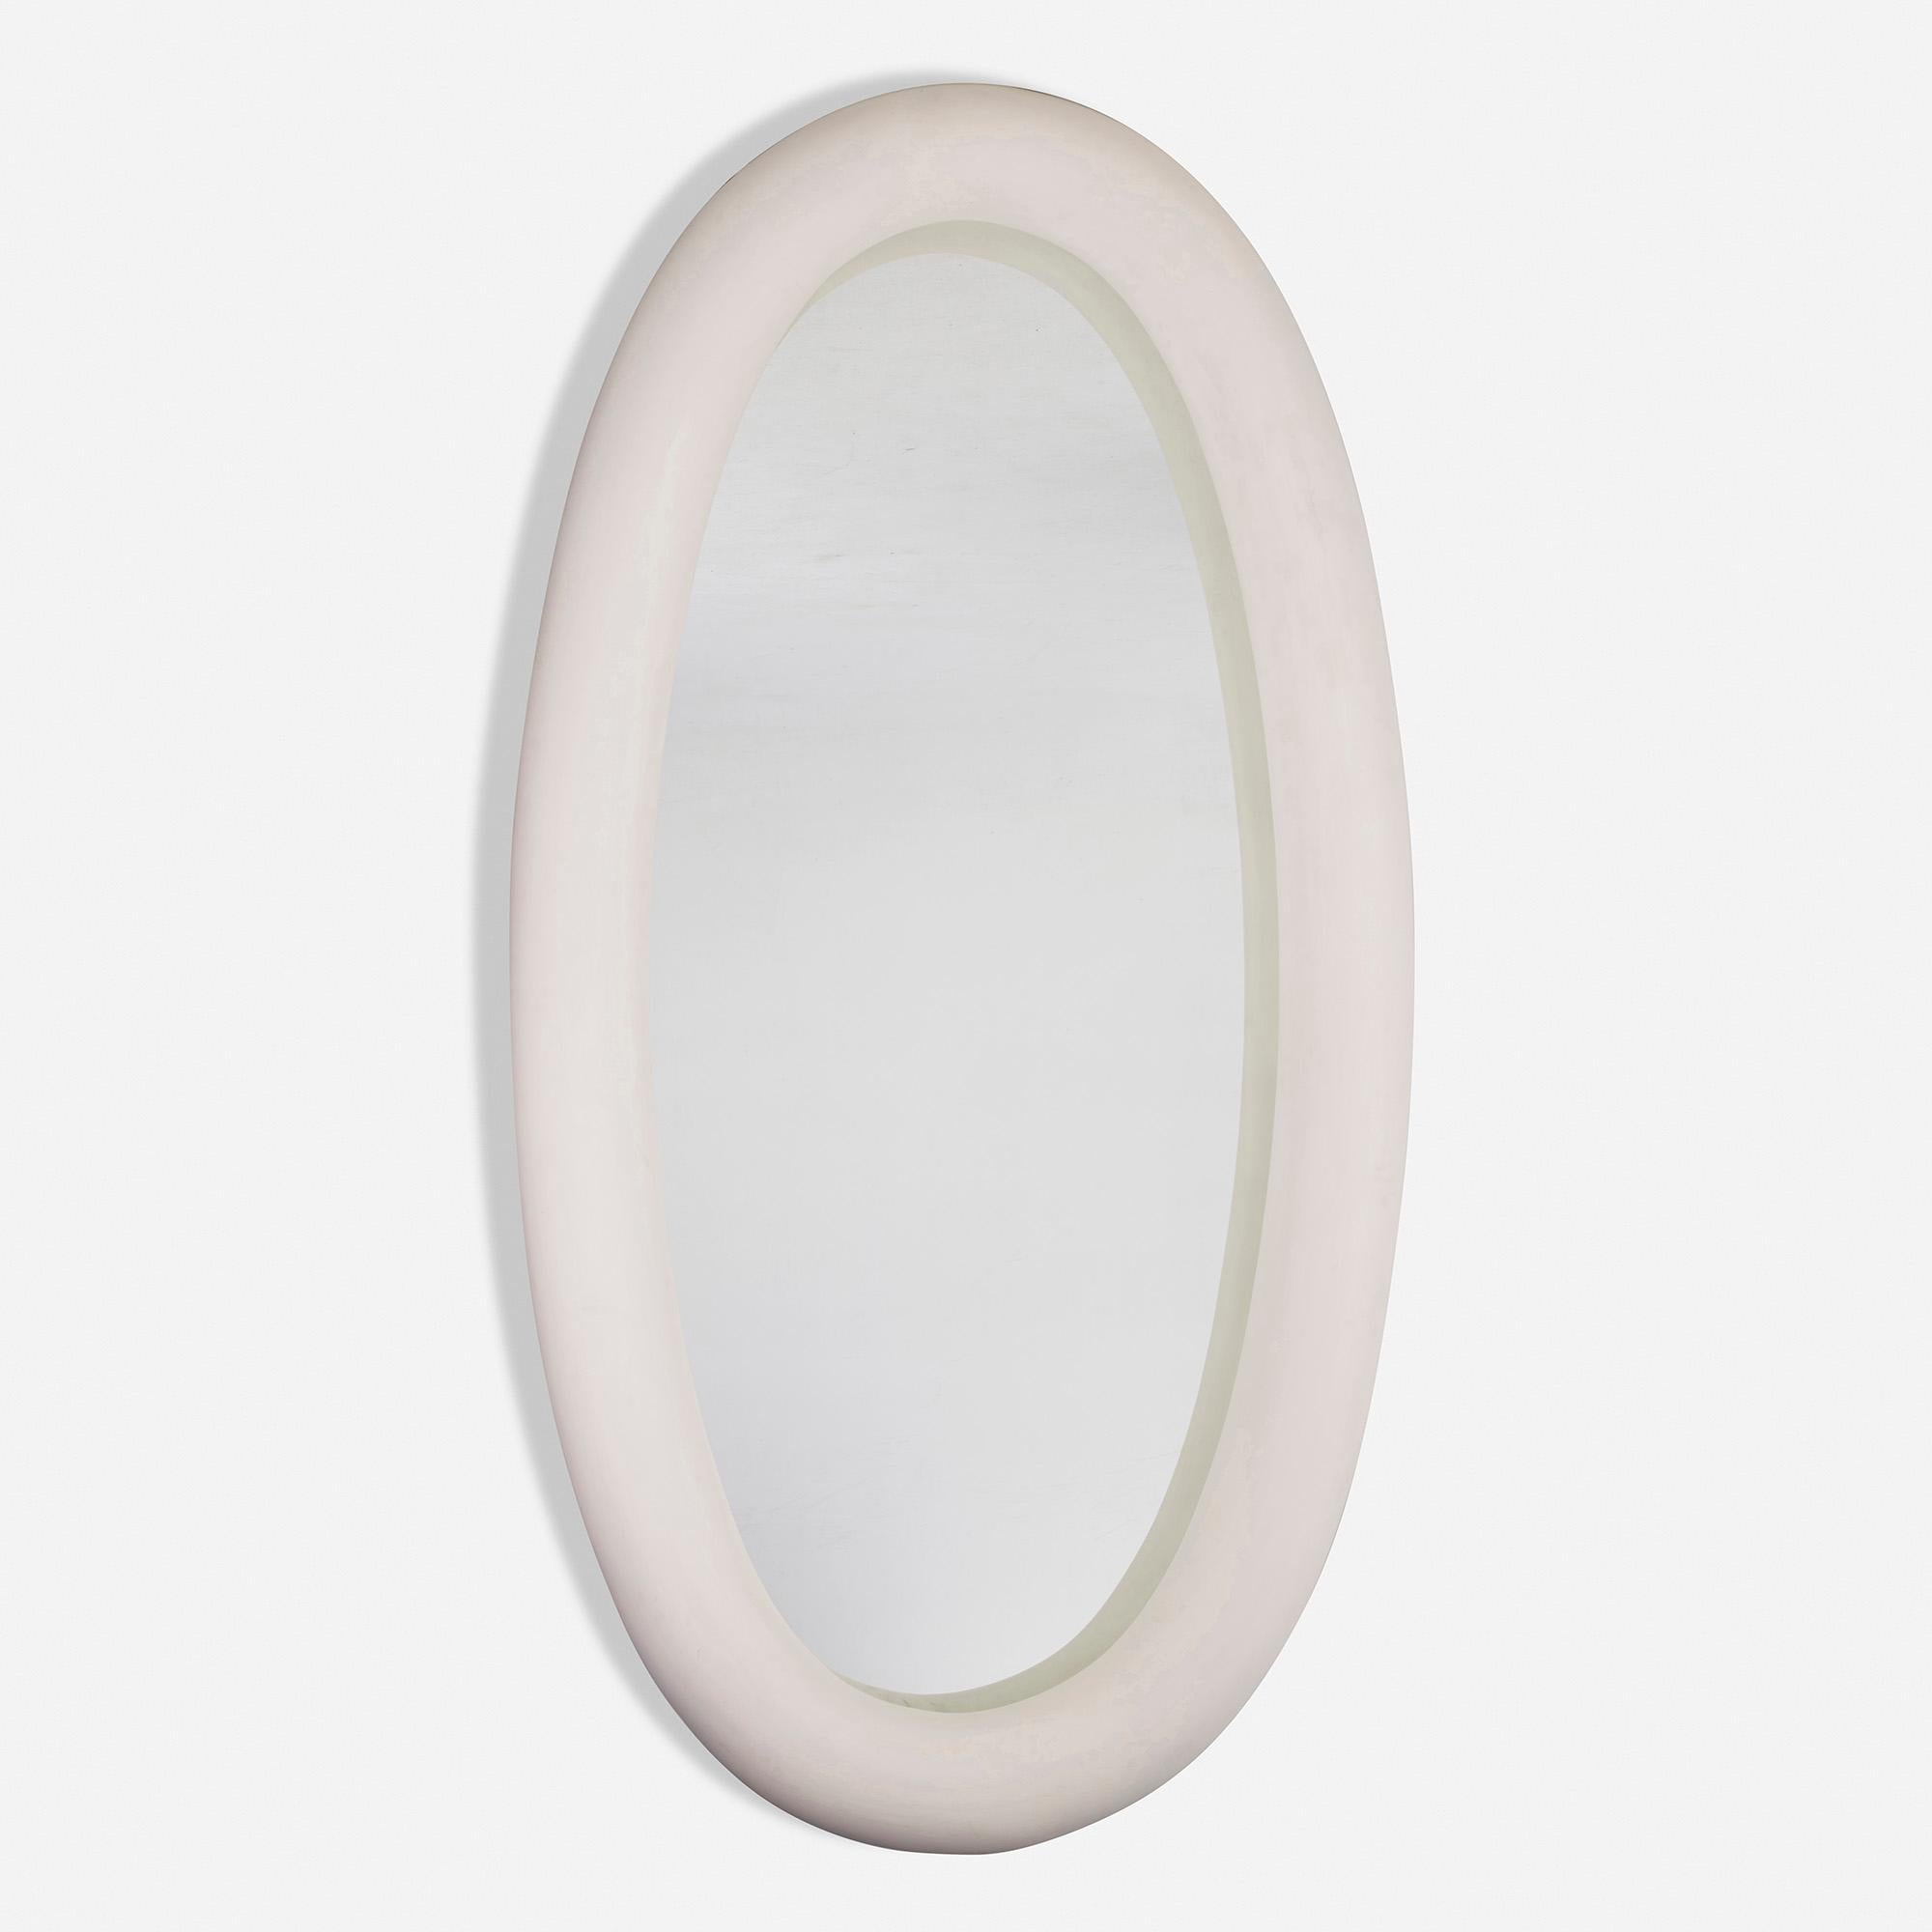 Provenance: This custom mirror comes from a Jacques Grange designed interior.

Made in: France, 1994-1996

Material: plaster over resin, mirrored glass

Size: 49.25 W × 7 D × 94.5 H in

Description: Raised mark near base ‘B.G.’.